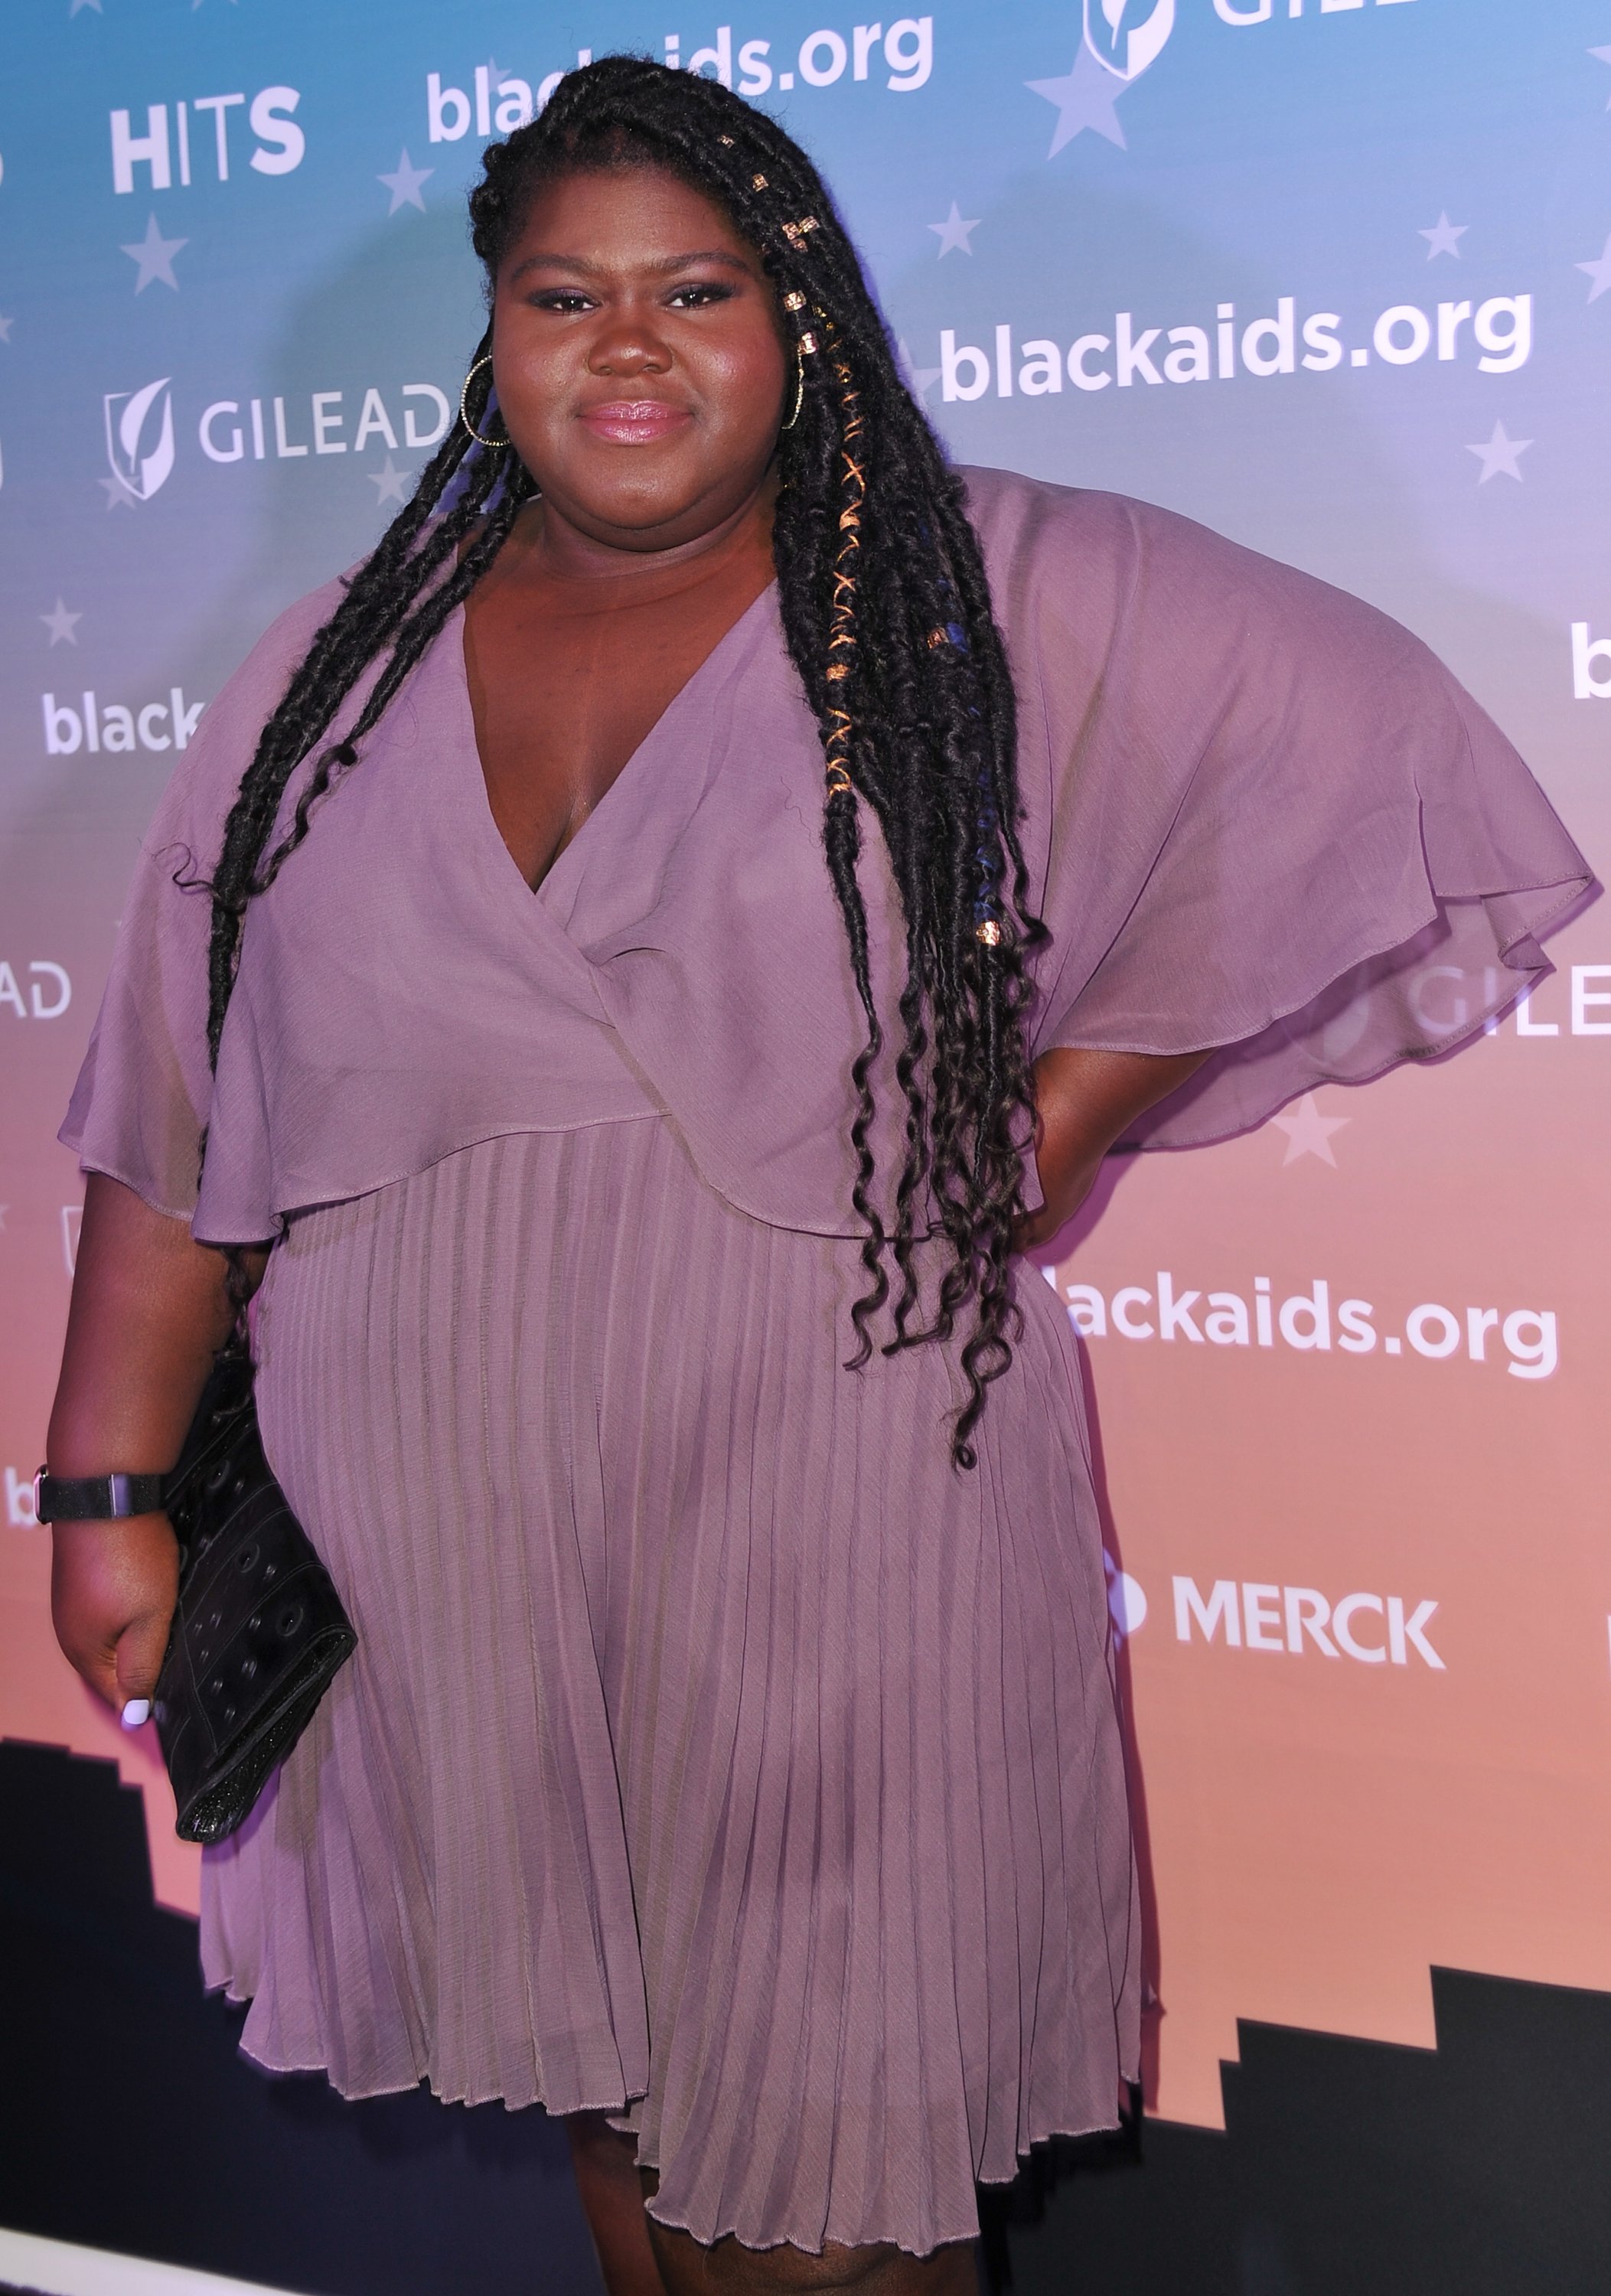 Gabby Sidibe attends the 2018 "Heroes in the Struggle" Gala of Black AIDS Institute on December 1, 2018 in Los Angeles, California. | Photo: Getty Images